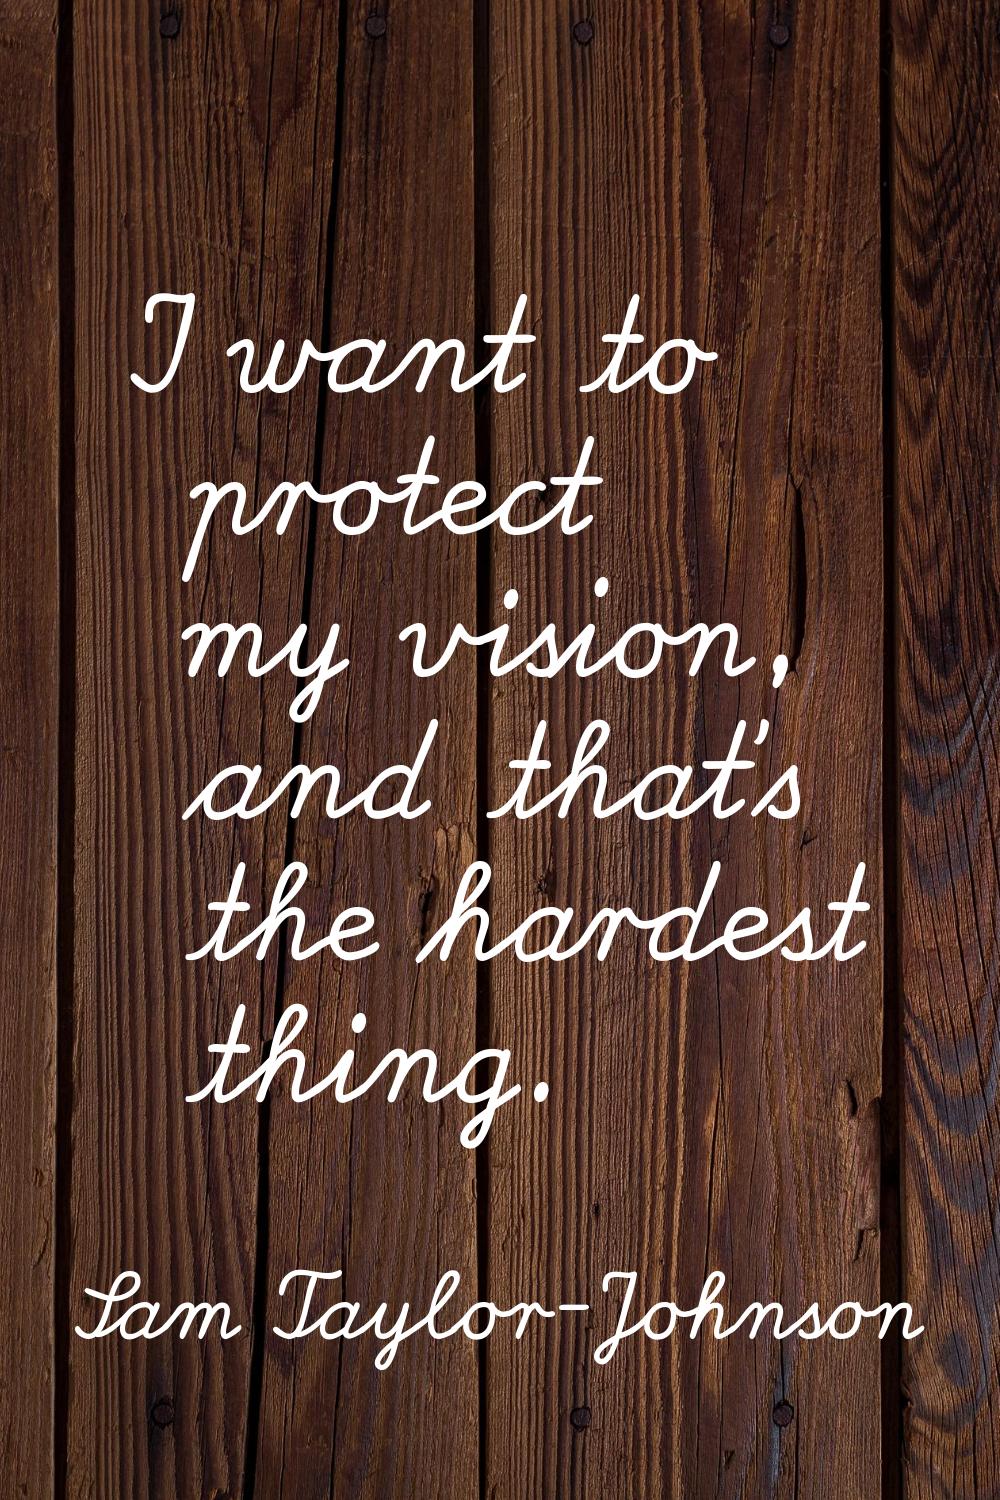 I want to protect my vision, and that's the hardest thing.